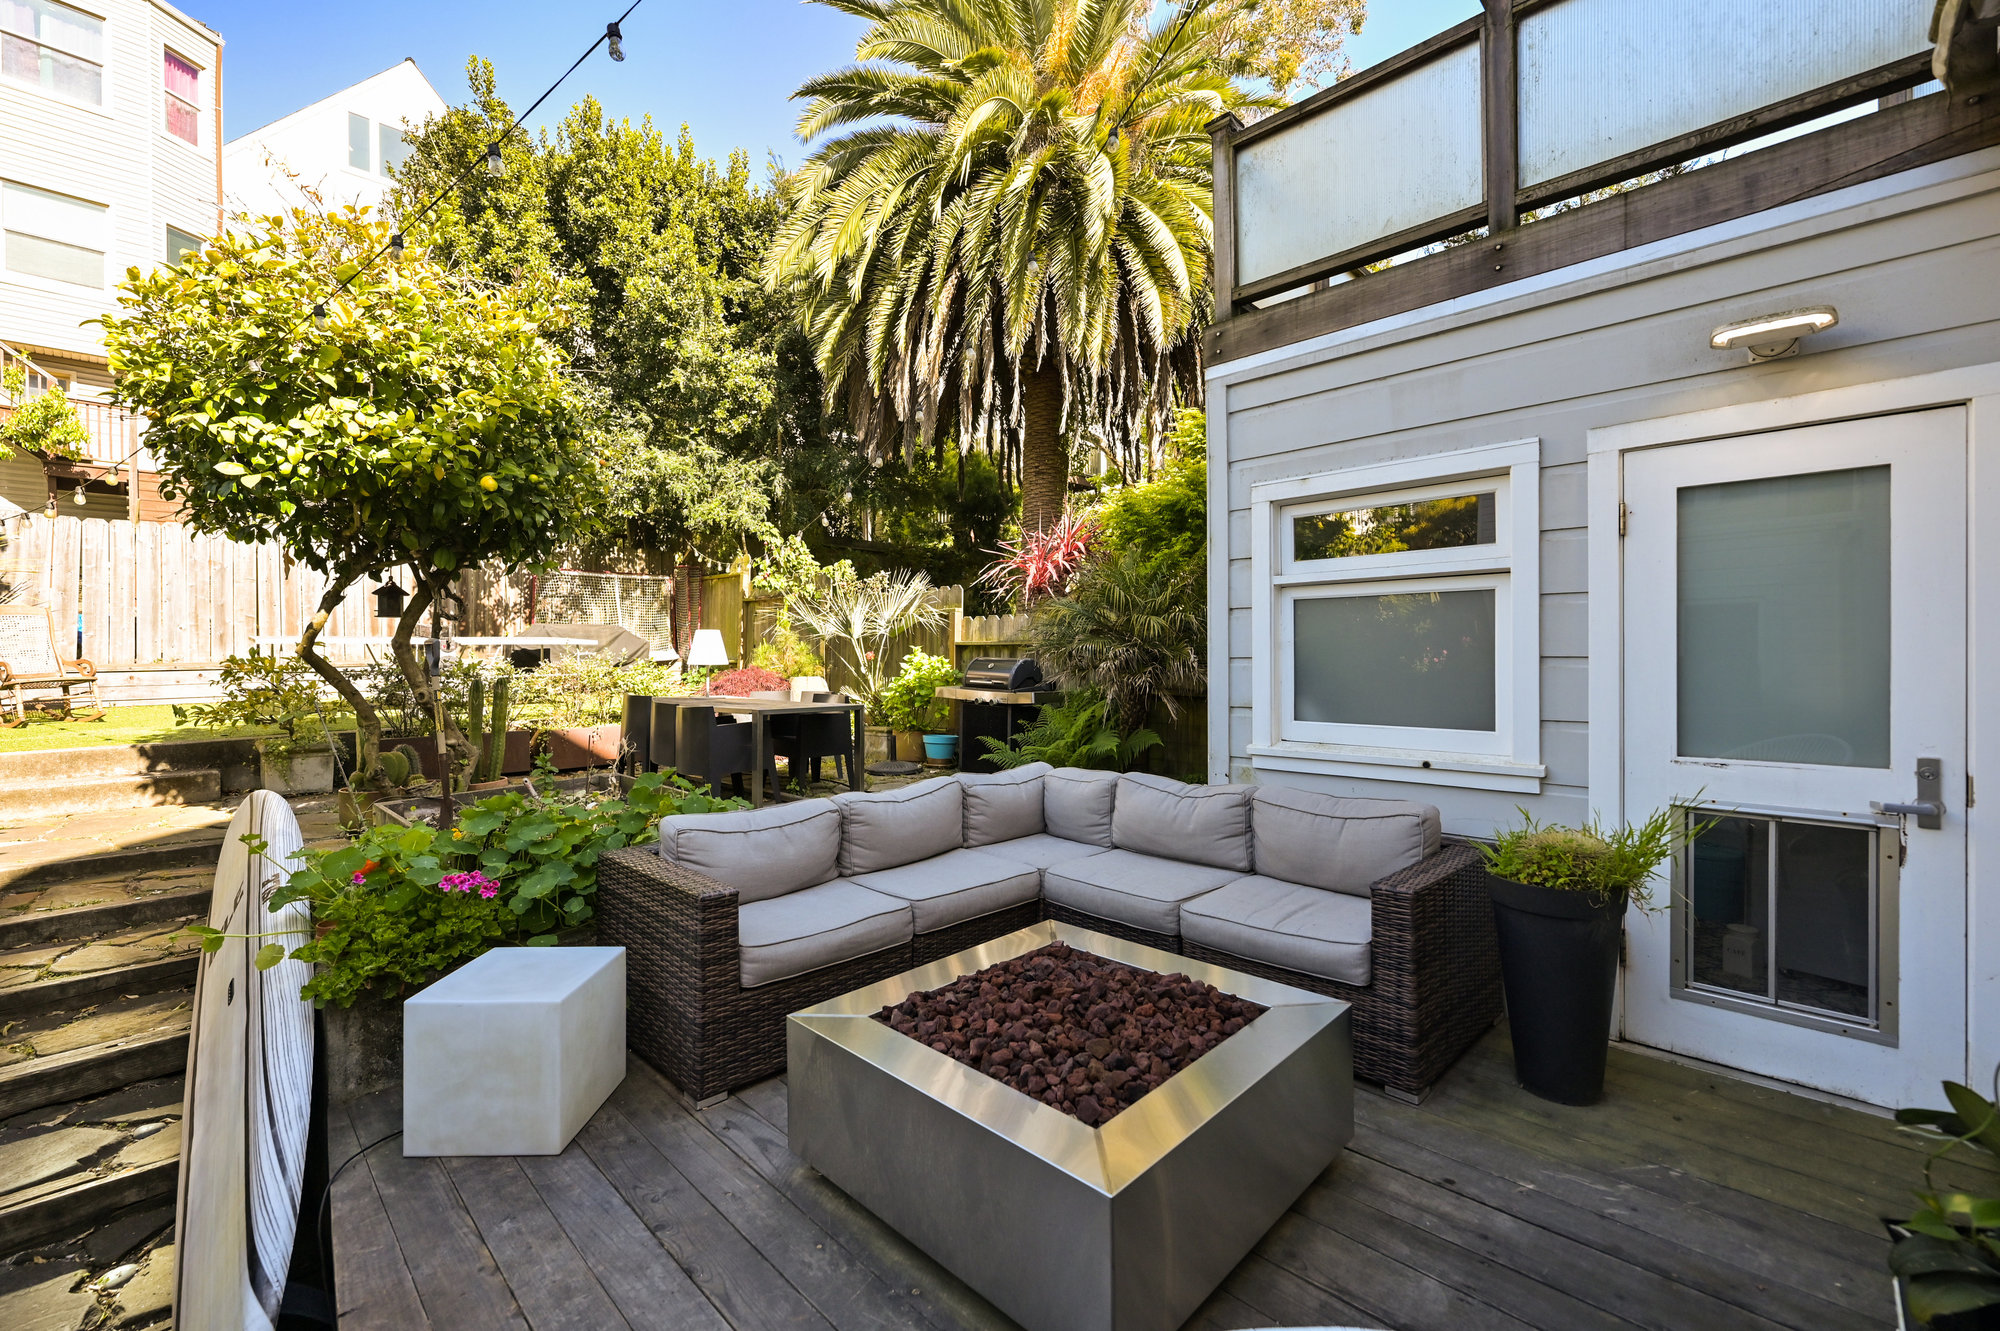 Property Photo: Patio with an outdoor living space and fireplace